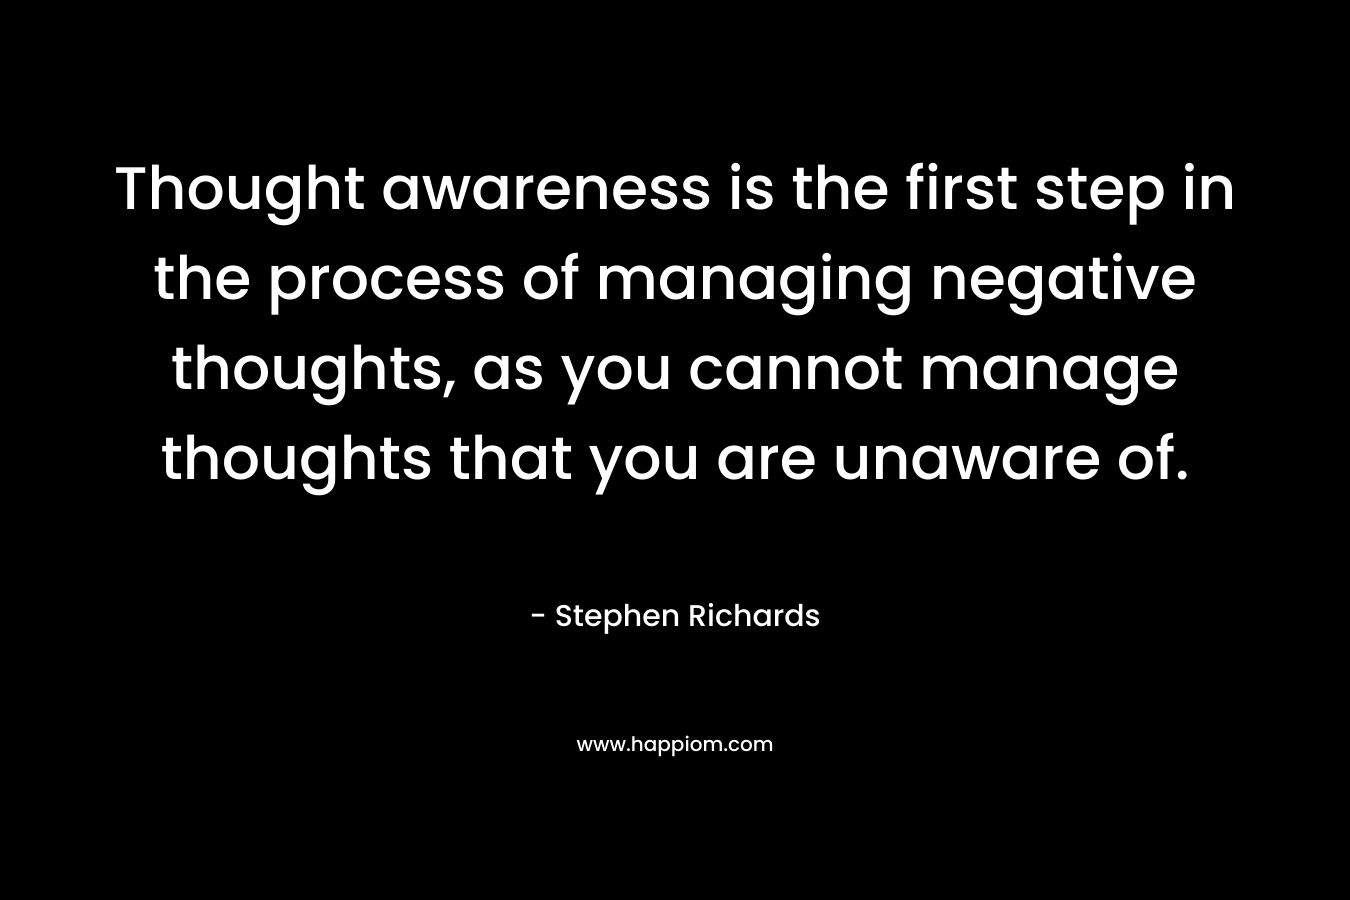 Thought awareness is the first step in the process of managing negative thoughts, as you cannot manage thoughts that you are unaware of.